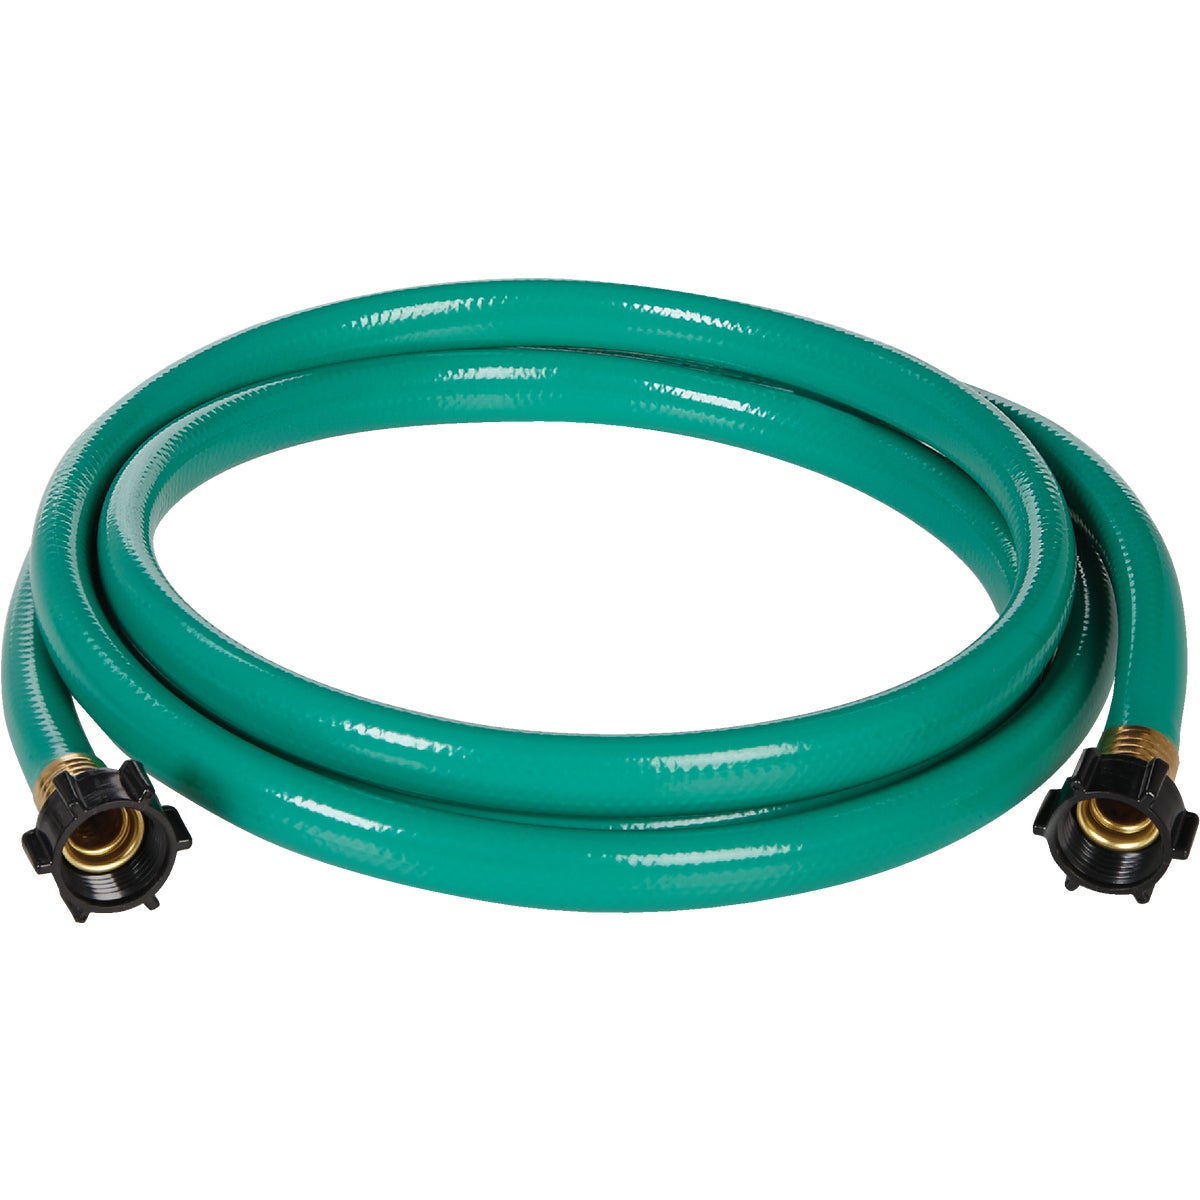 Item 704674, Light duty leader hose. Ideal for connecting hose reel cart to faucet.